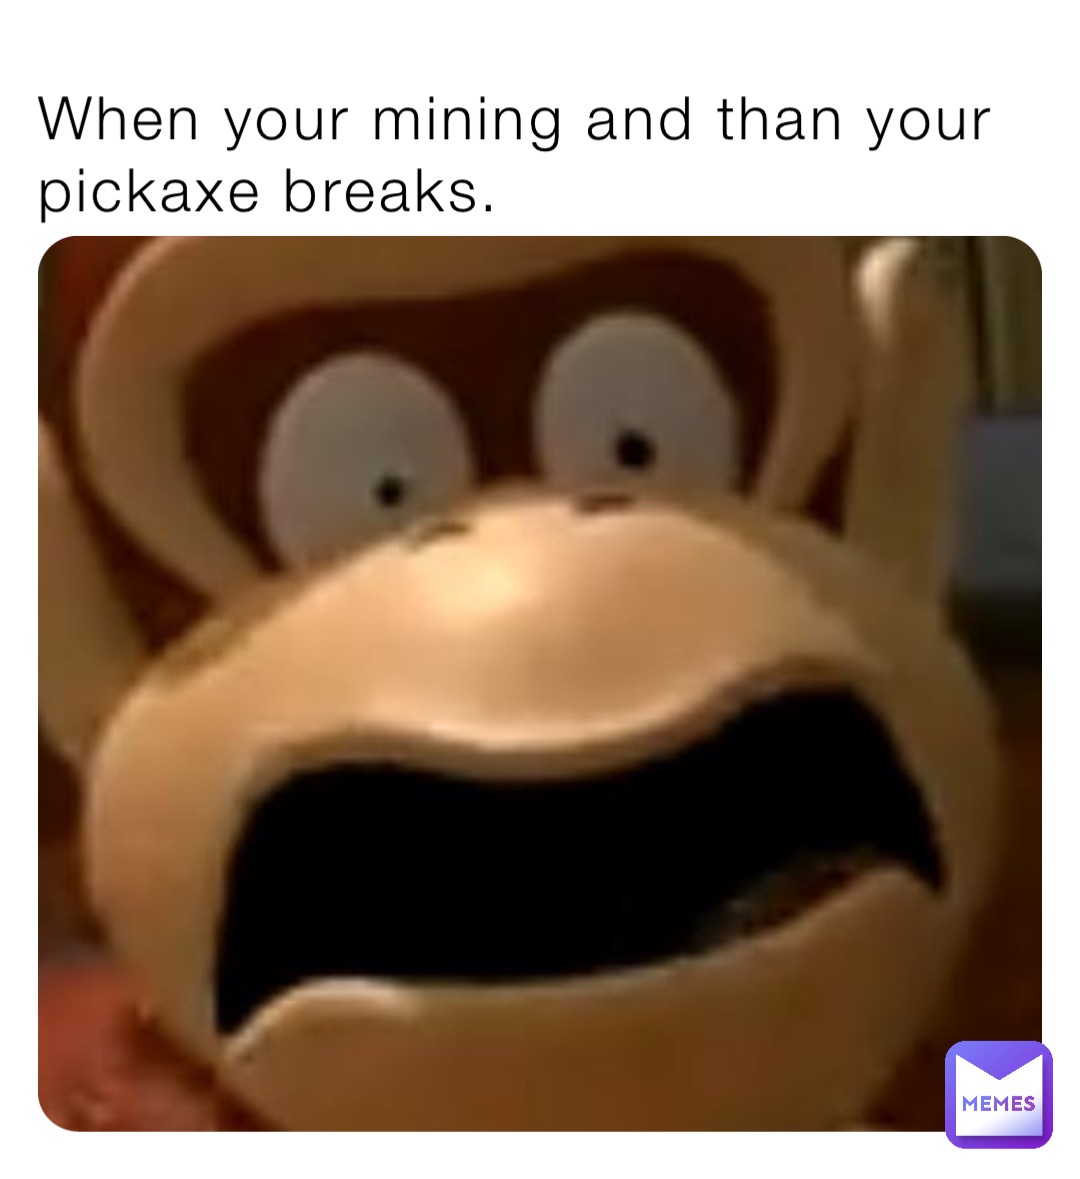 When your mining and than your pickaxe breaks.